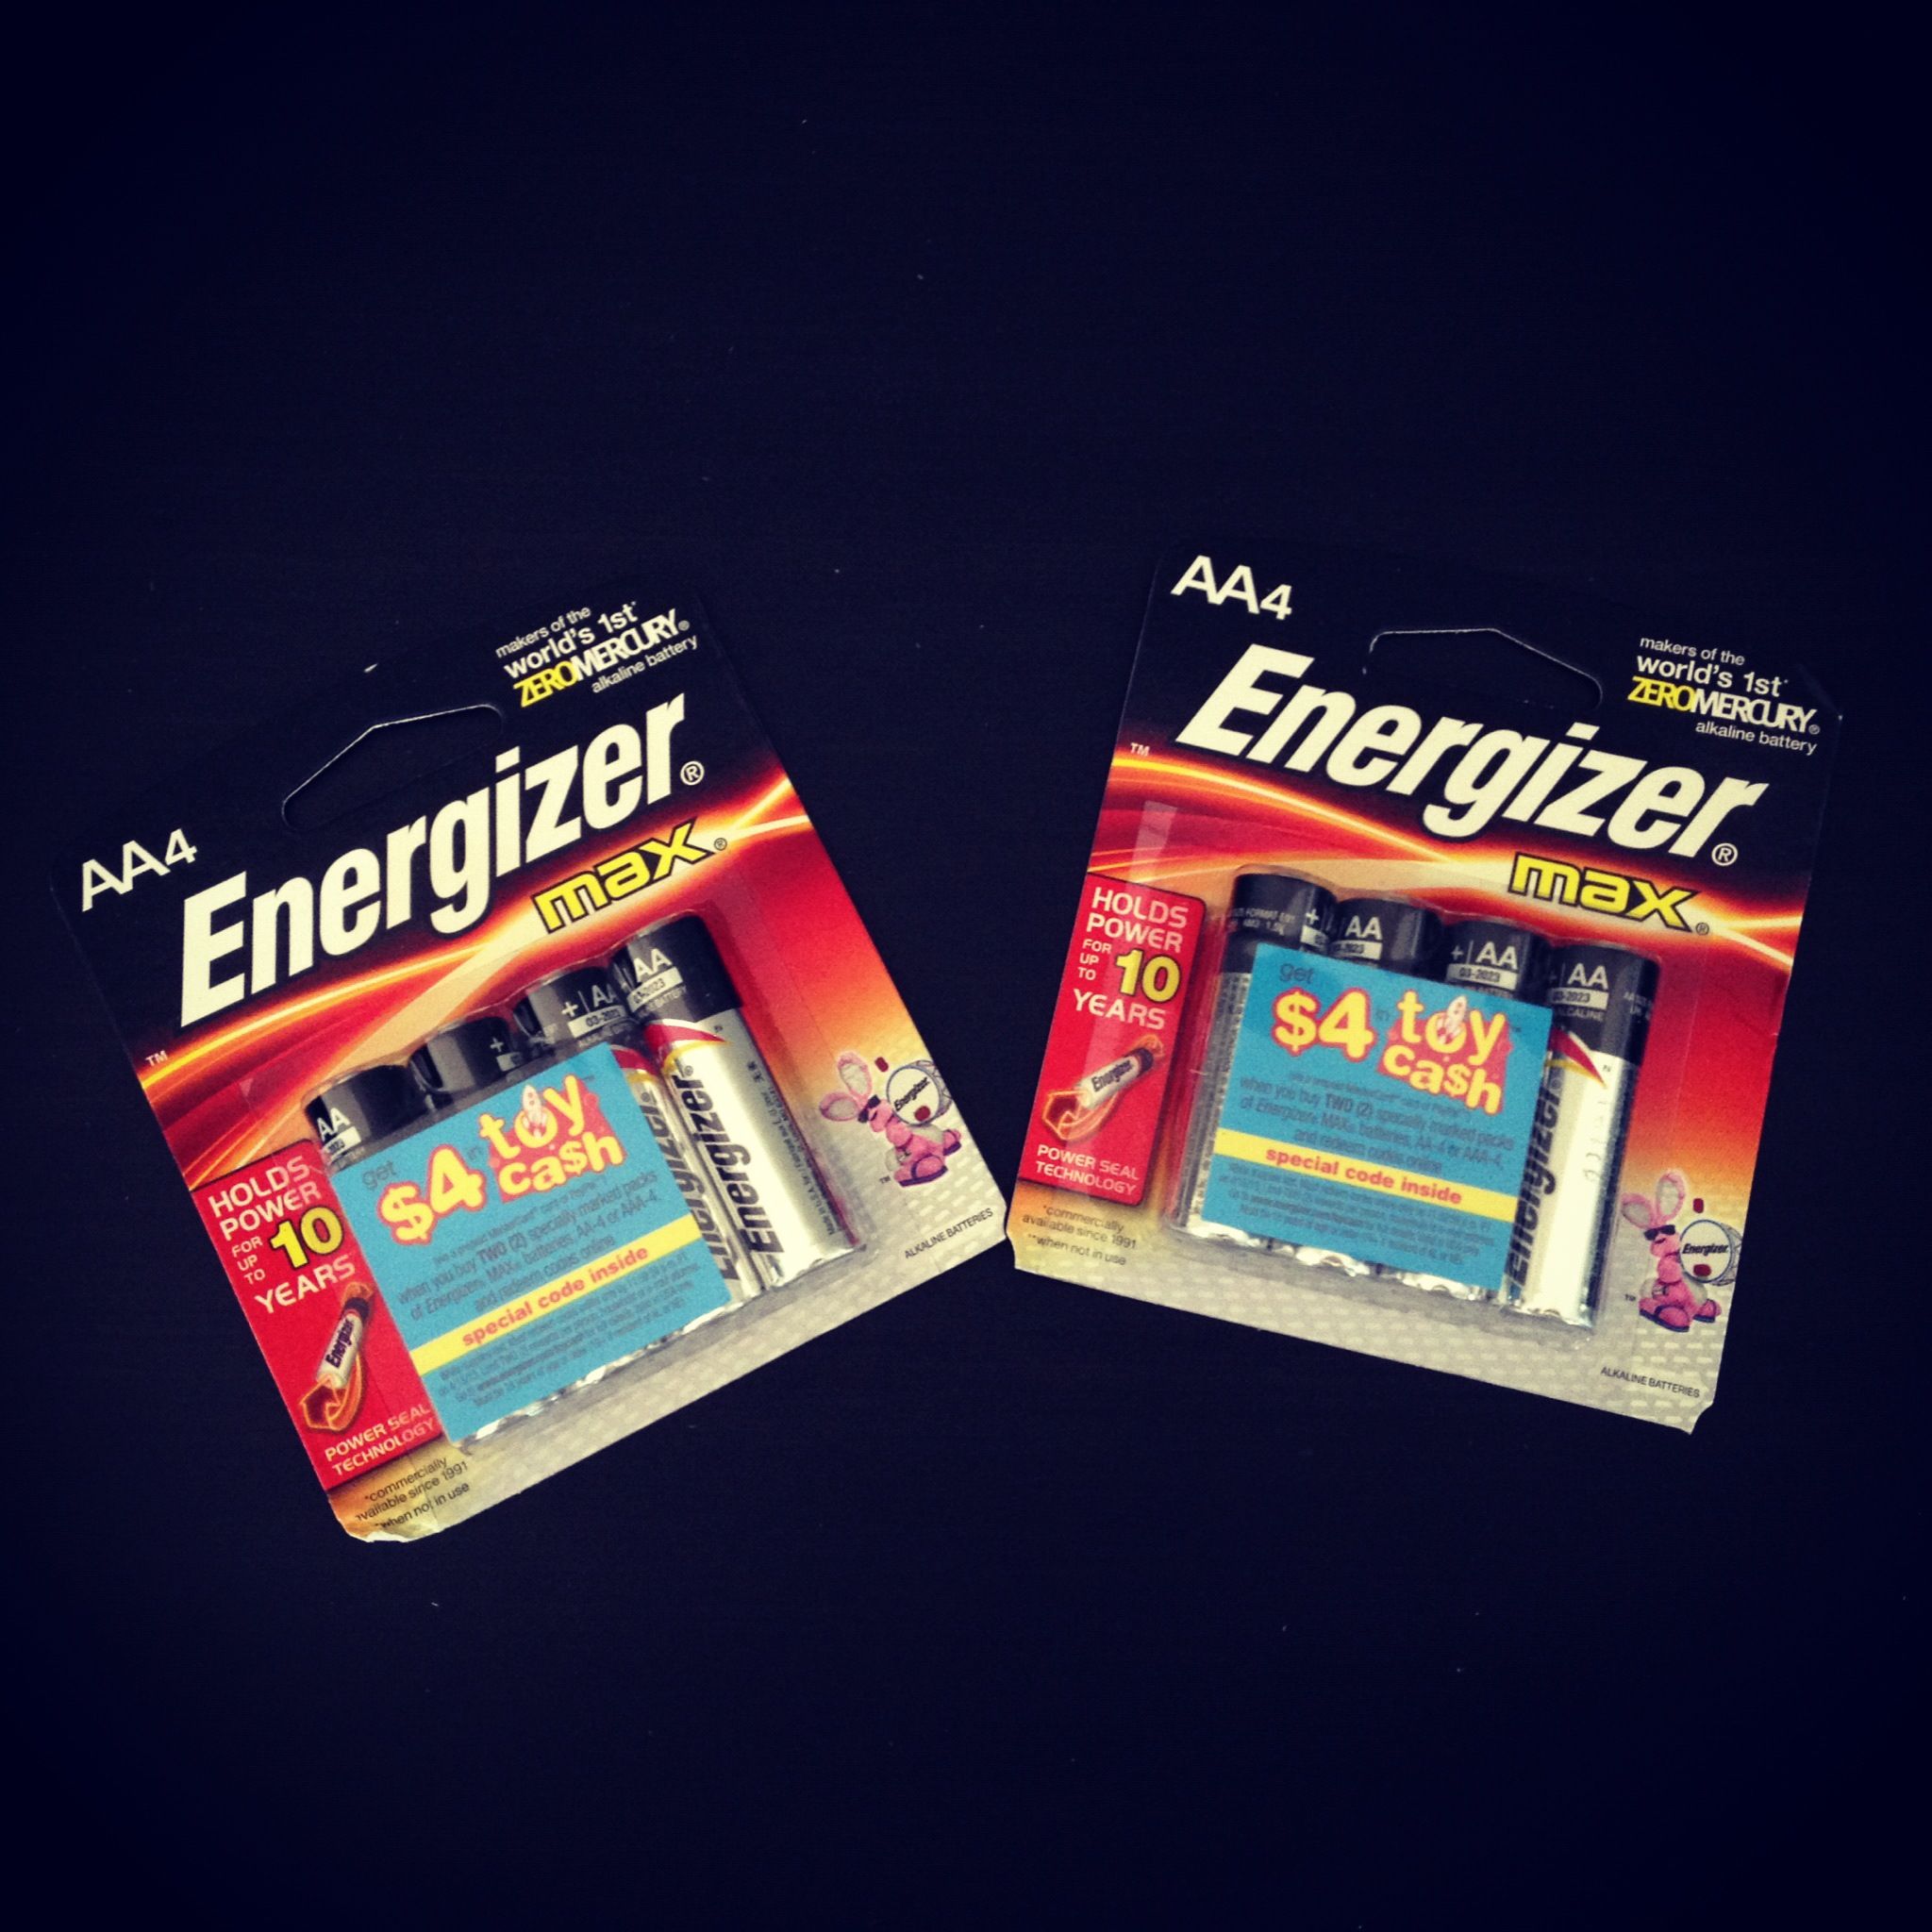 Prepare For Emergencies With Energizer #PoweringSafety